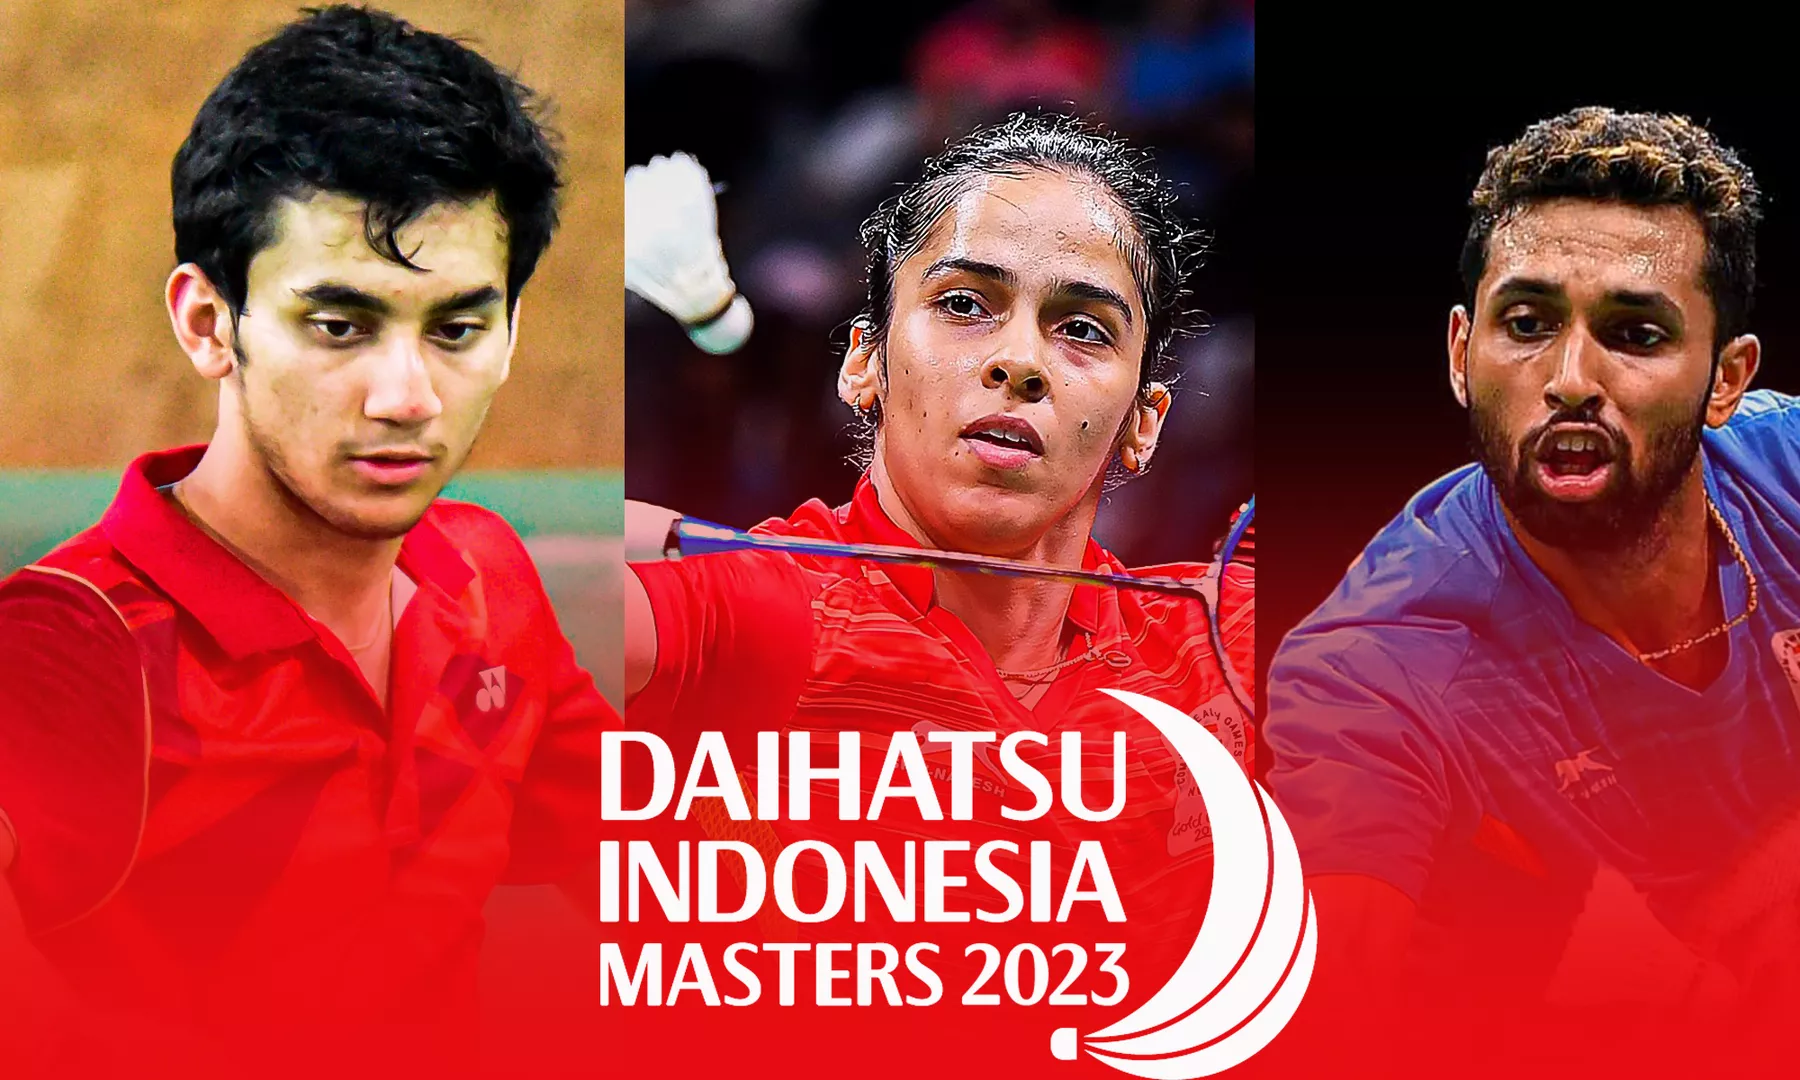 Indonesia Masters 2023 India’s full fixtures, schedule, results and